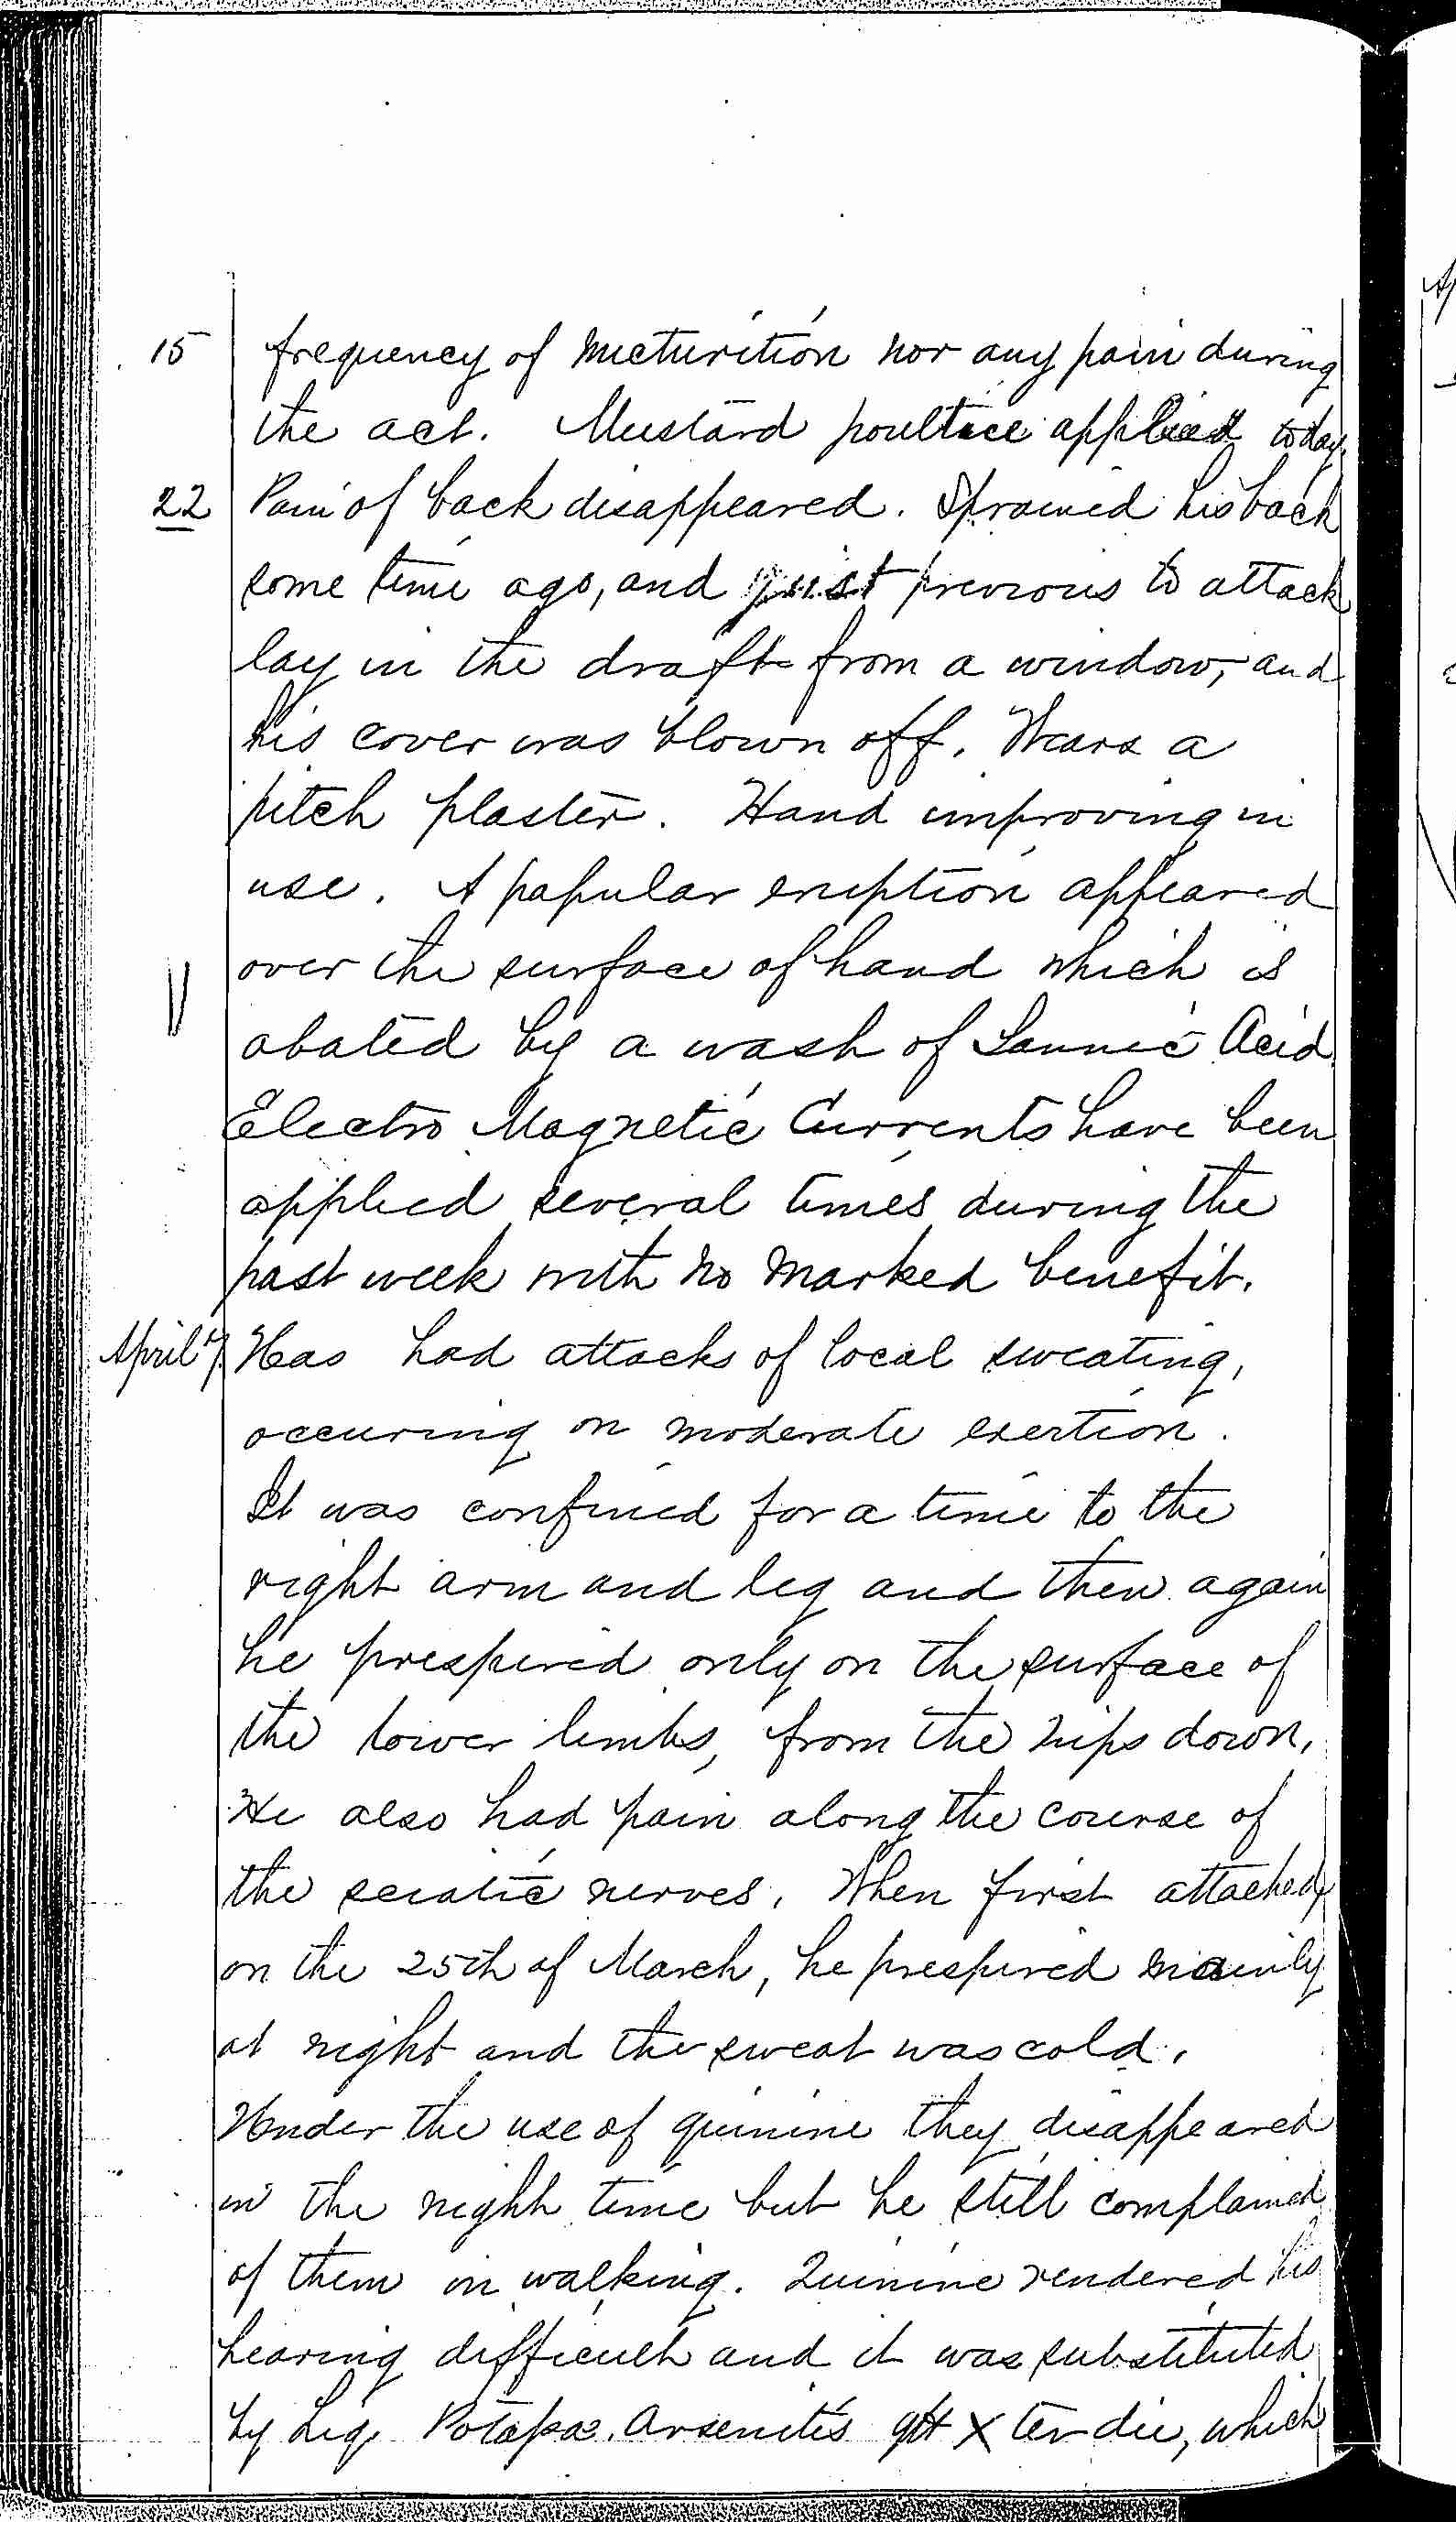 Entry for James Lockrey (page 4 of 5) in the log Hospital Tickets and Case Papers - Naval Hospital - Washington, D.C. - 1868-69